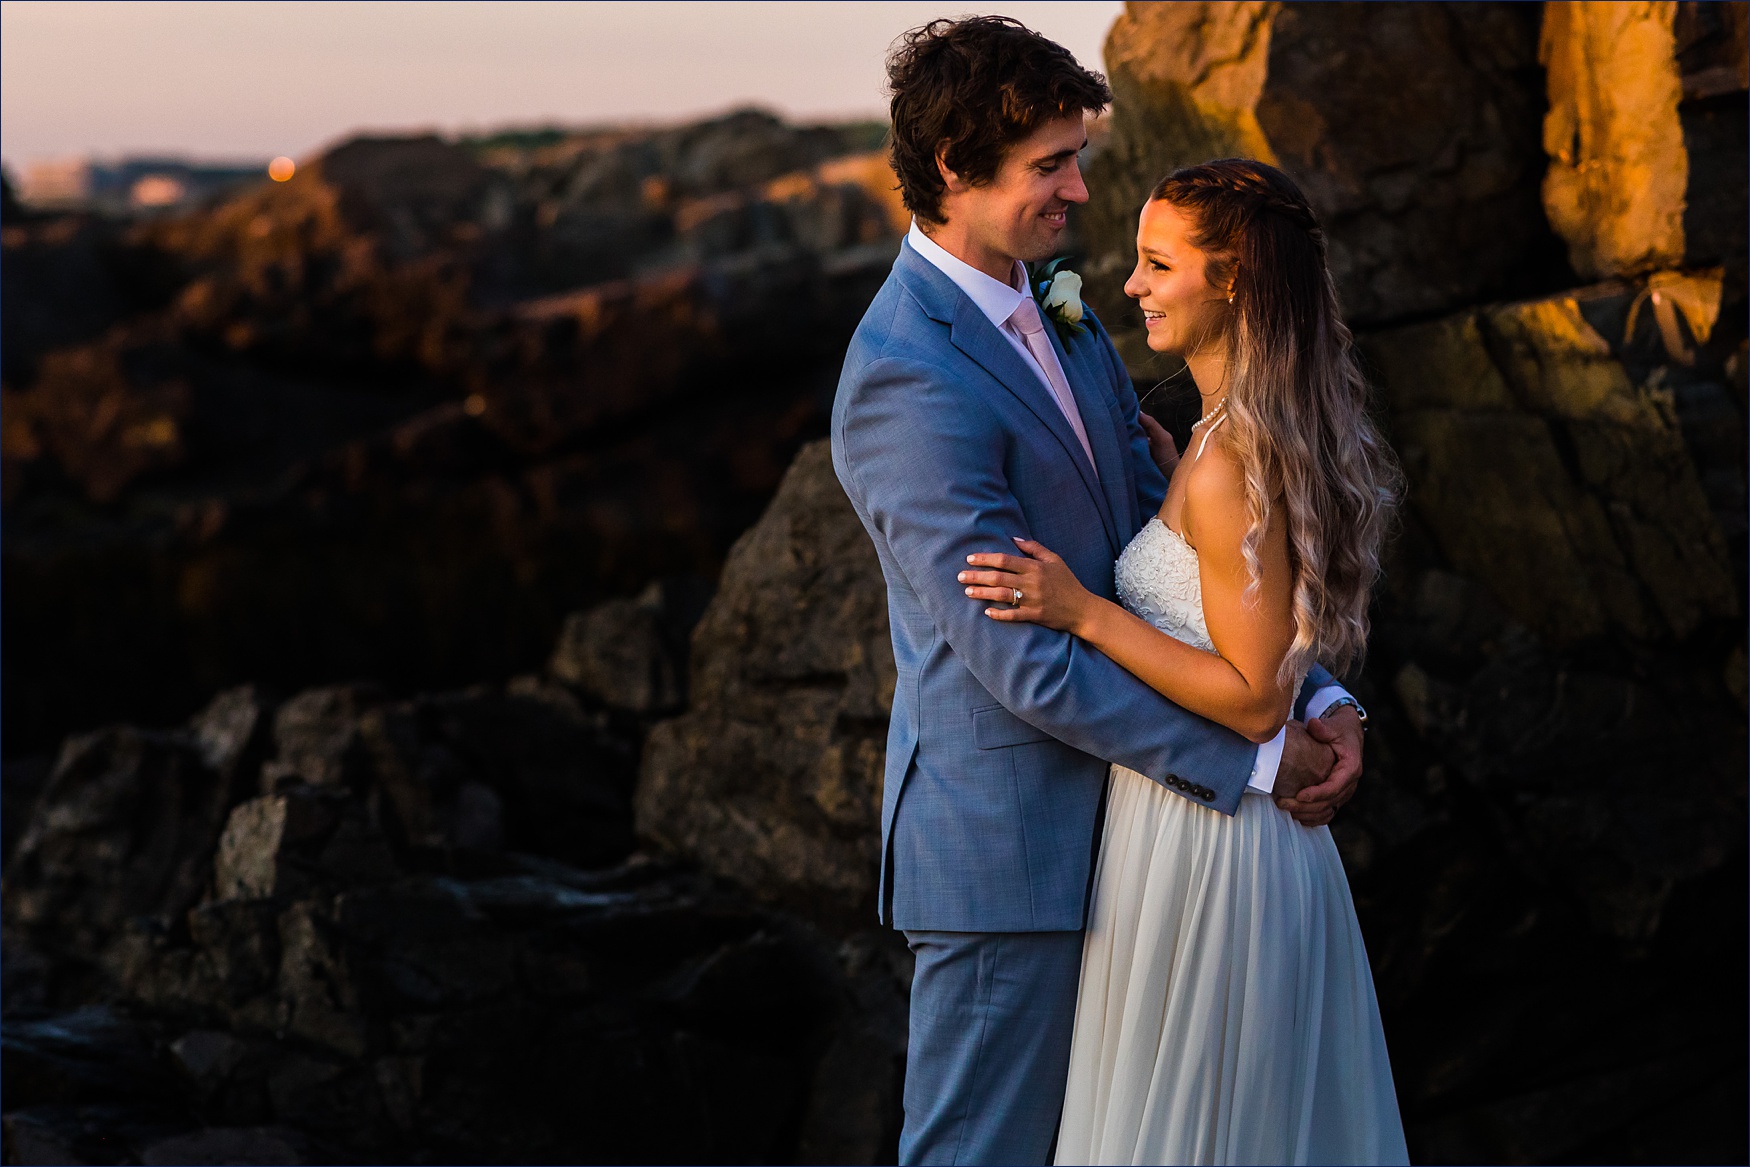 The bride and groom hold each other close while celebrating their sunrise Maine elopement